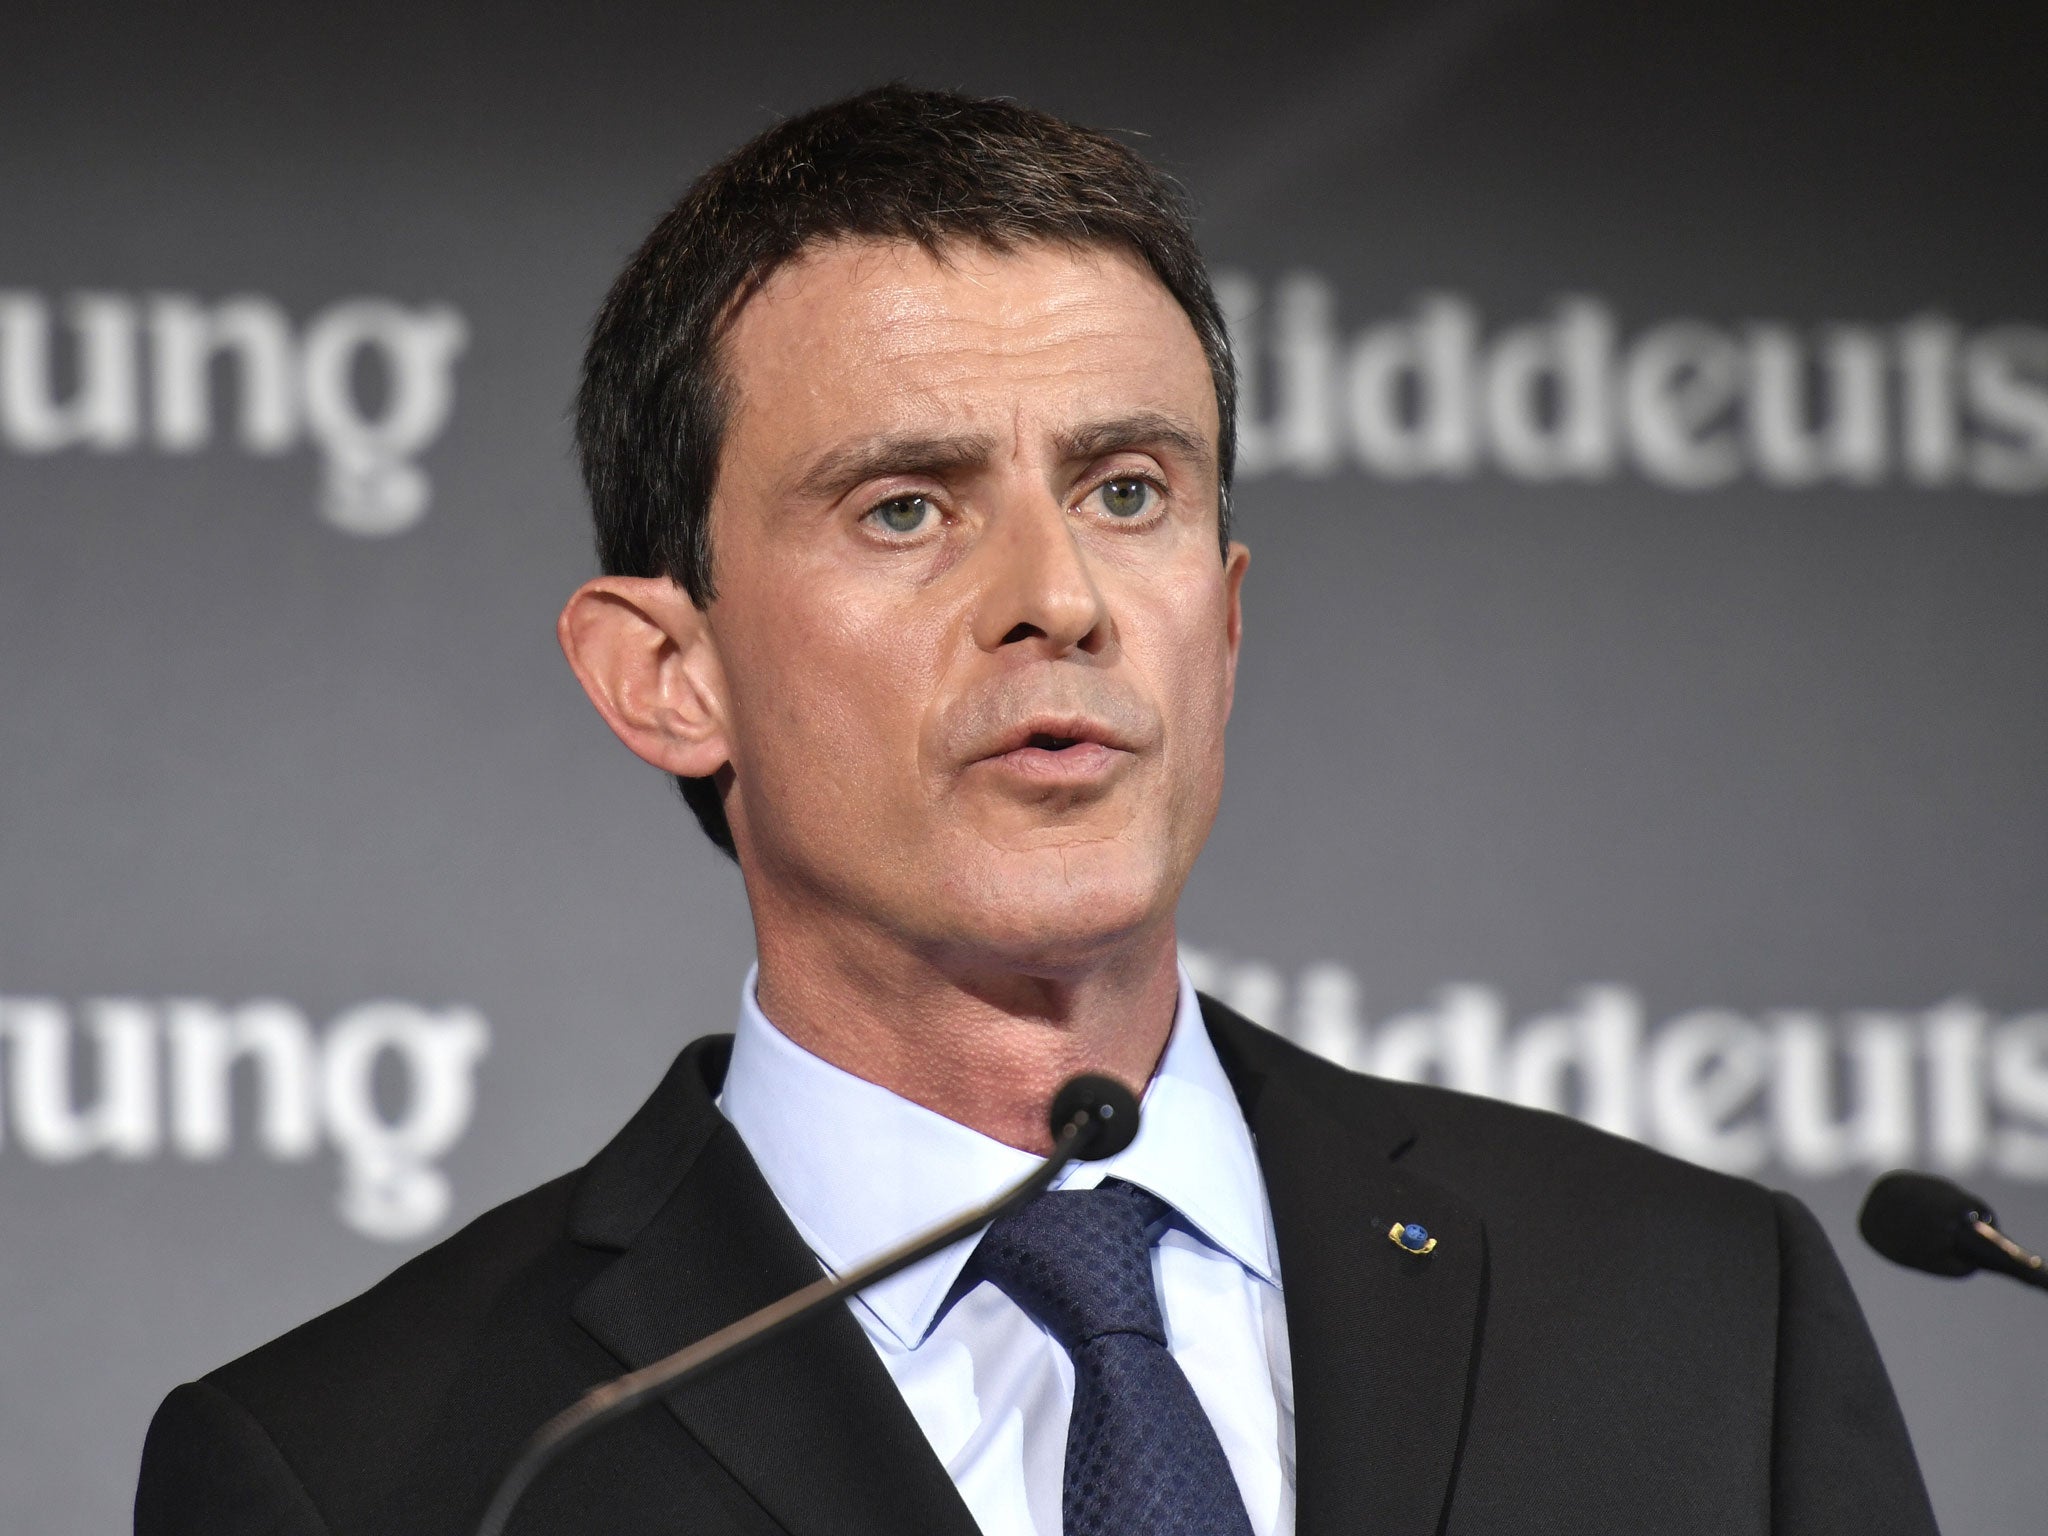 Mr Valls said France must continue to open up its economy